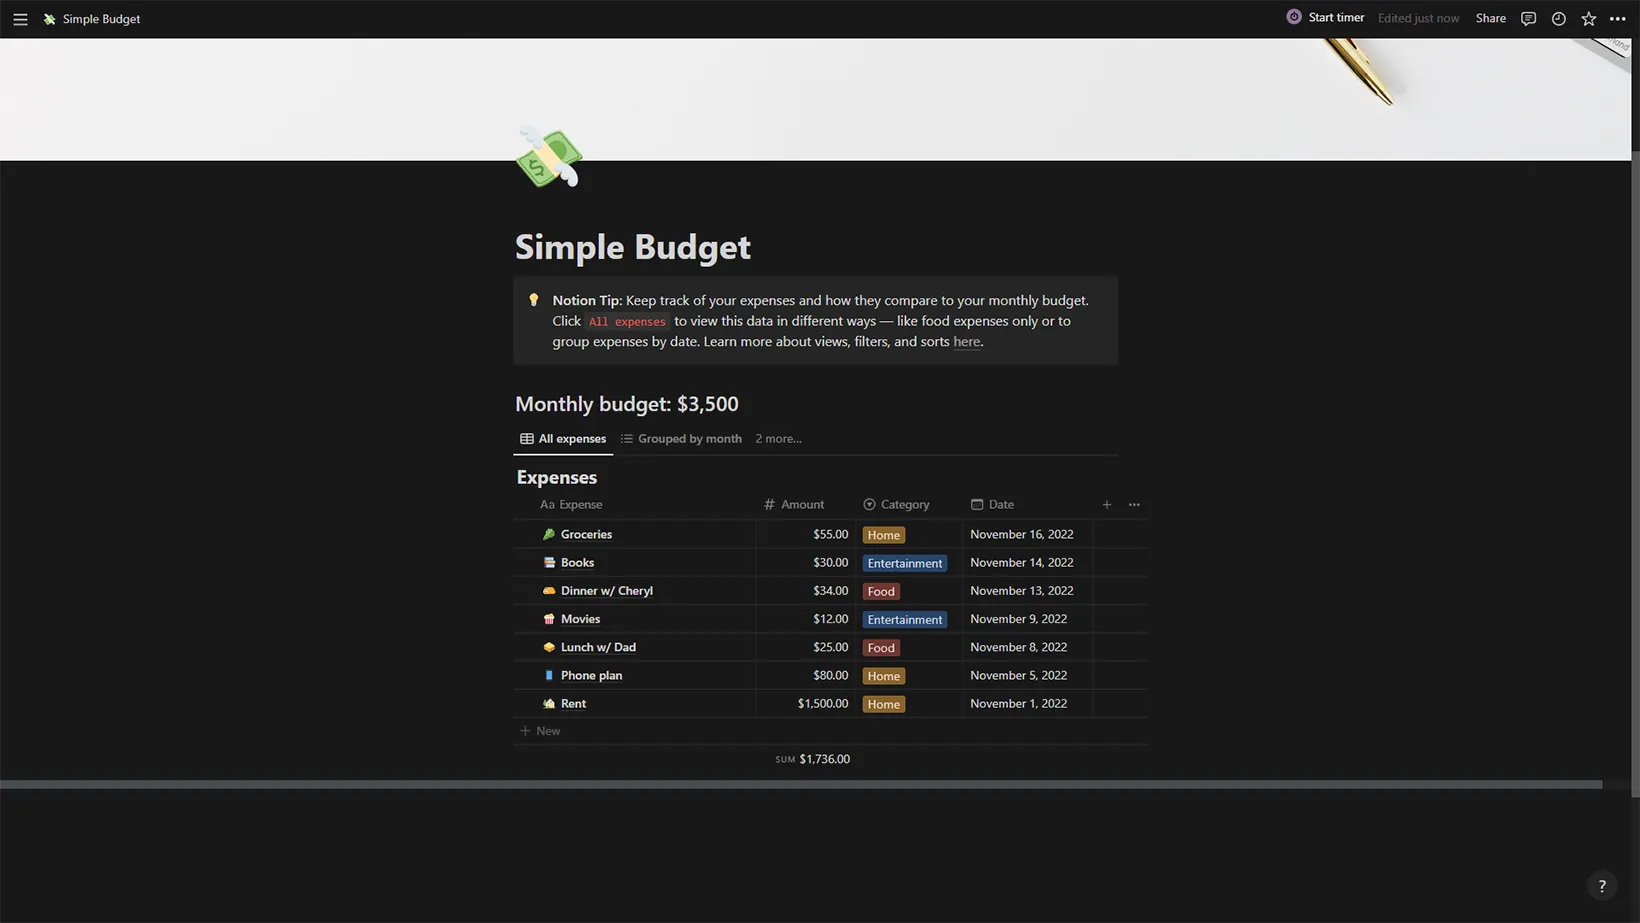 Simple Budget by Notion